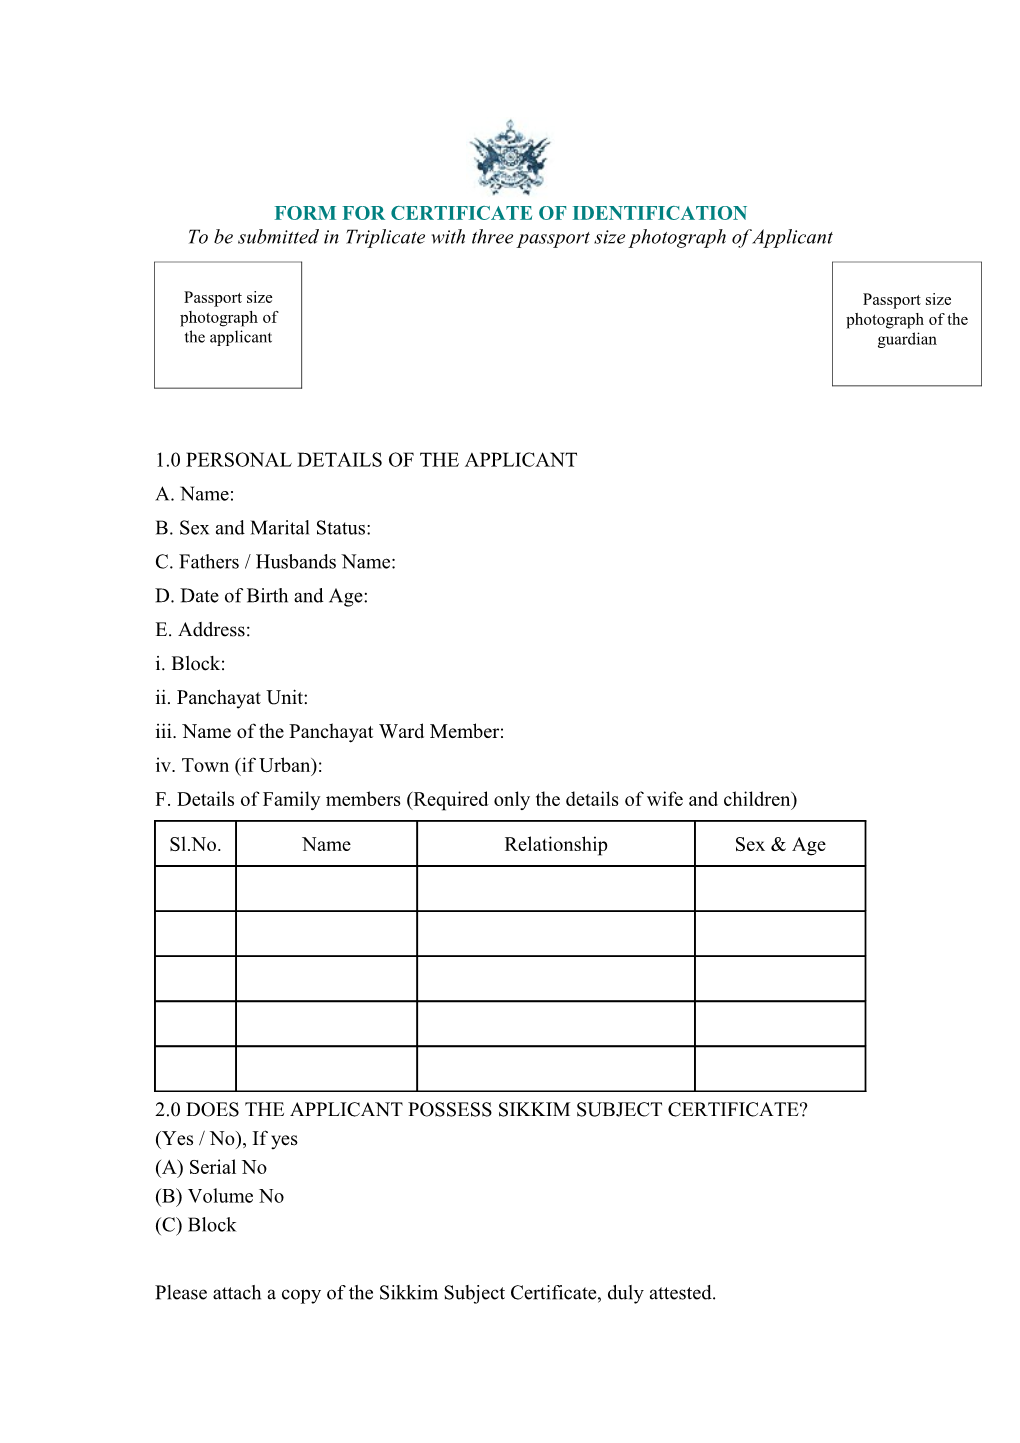 Form for Certificate of Identification